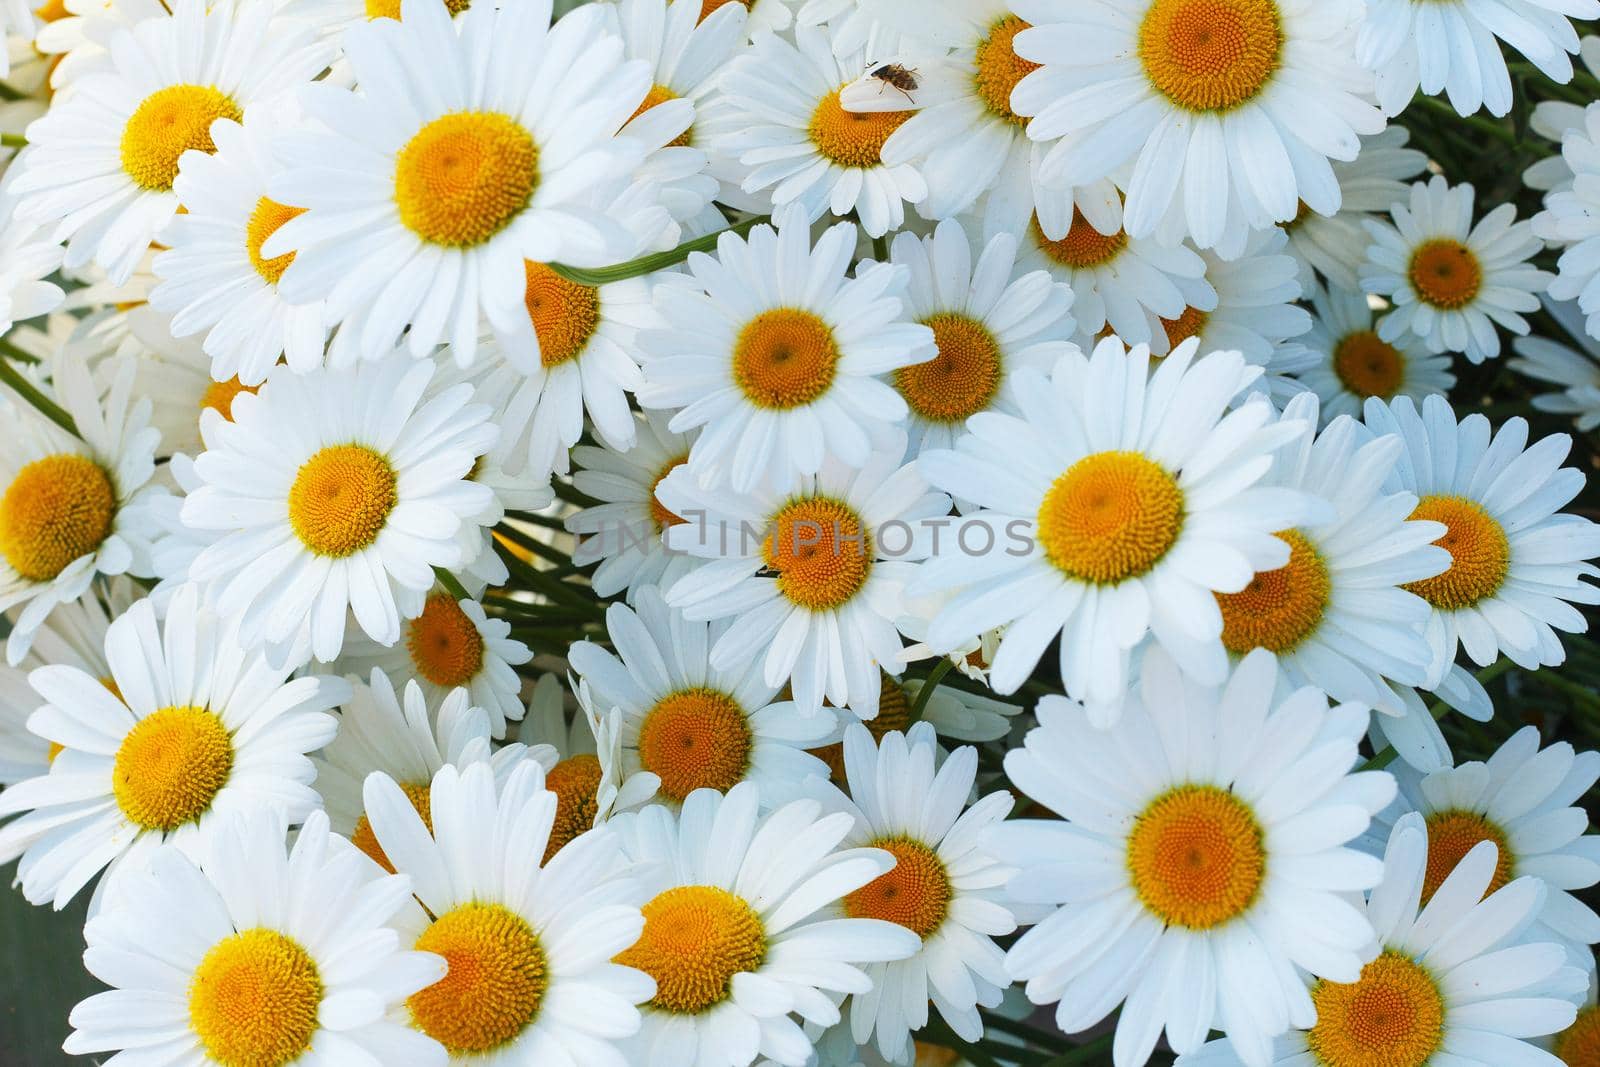 Chamomile flowers grown in the garden. by lara29